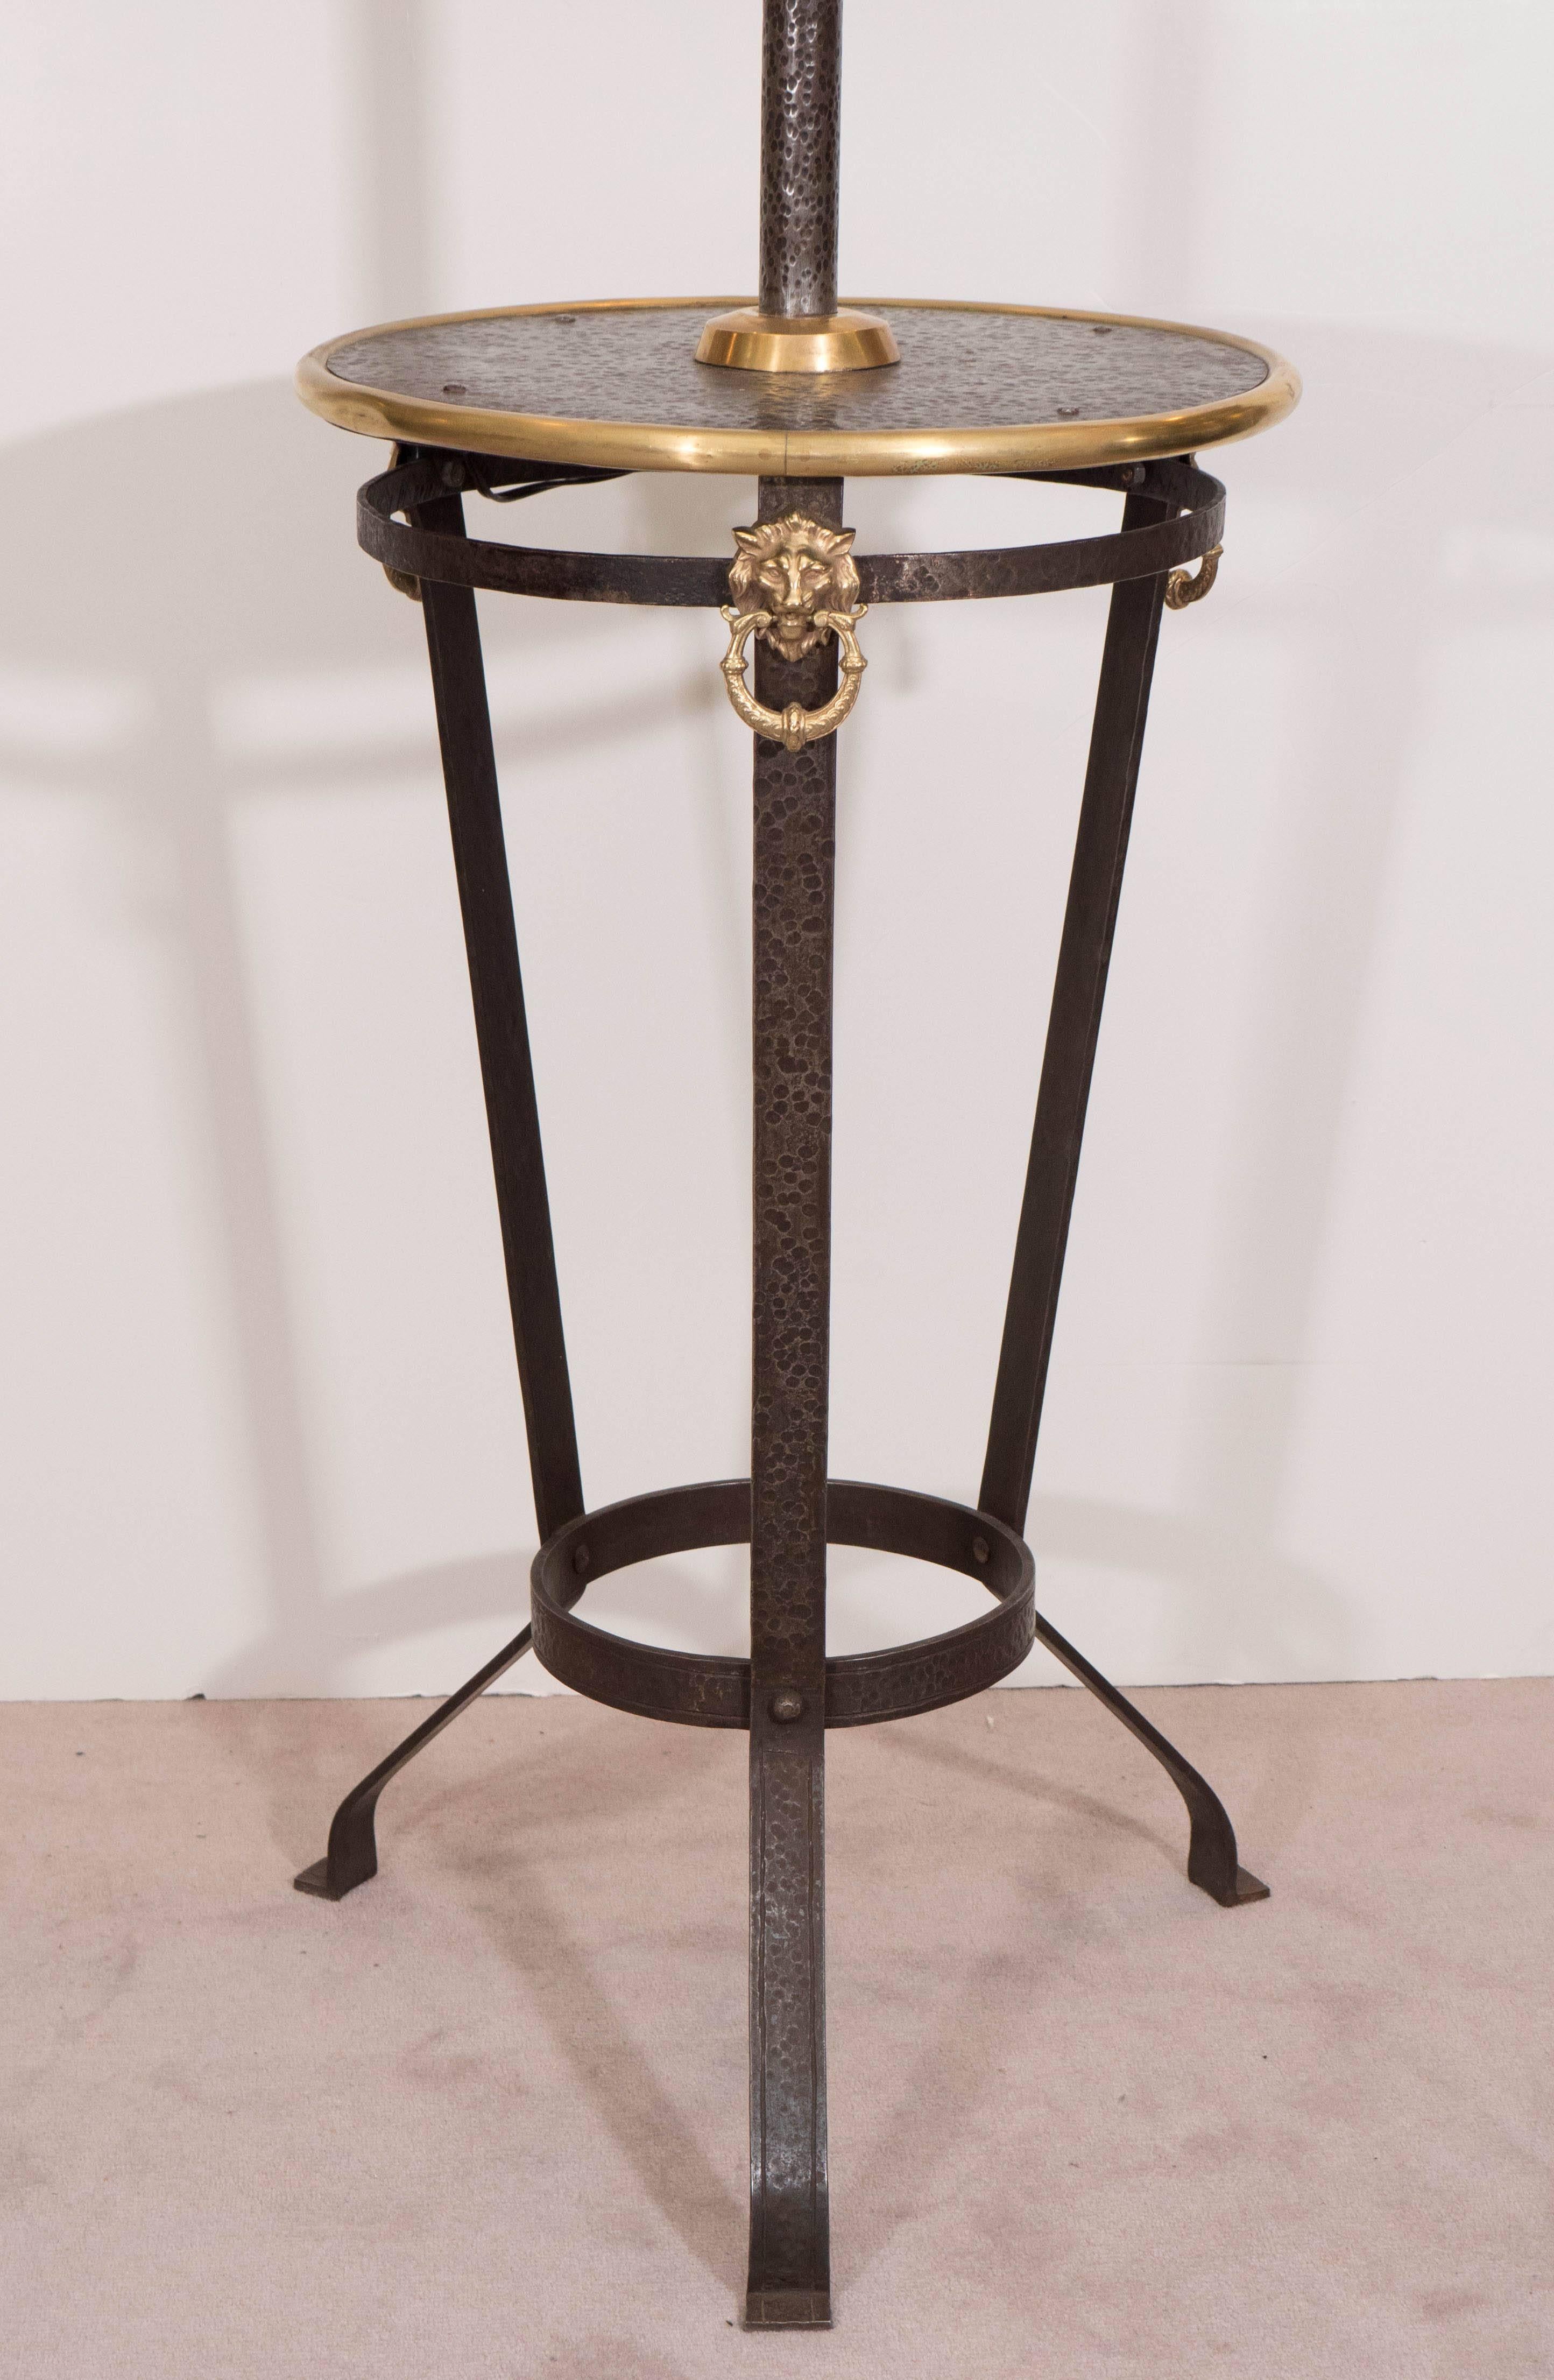 This incredibly unique Arts & Crafts table lamp, produced circa 1910, comes in hammered iron on tripod legs, with a round table, trimmed along the edge in bright brass, decorated with three lion heads with rings; the table measures 17